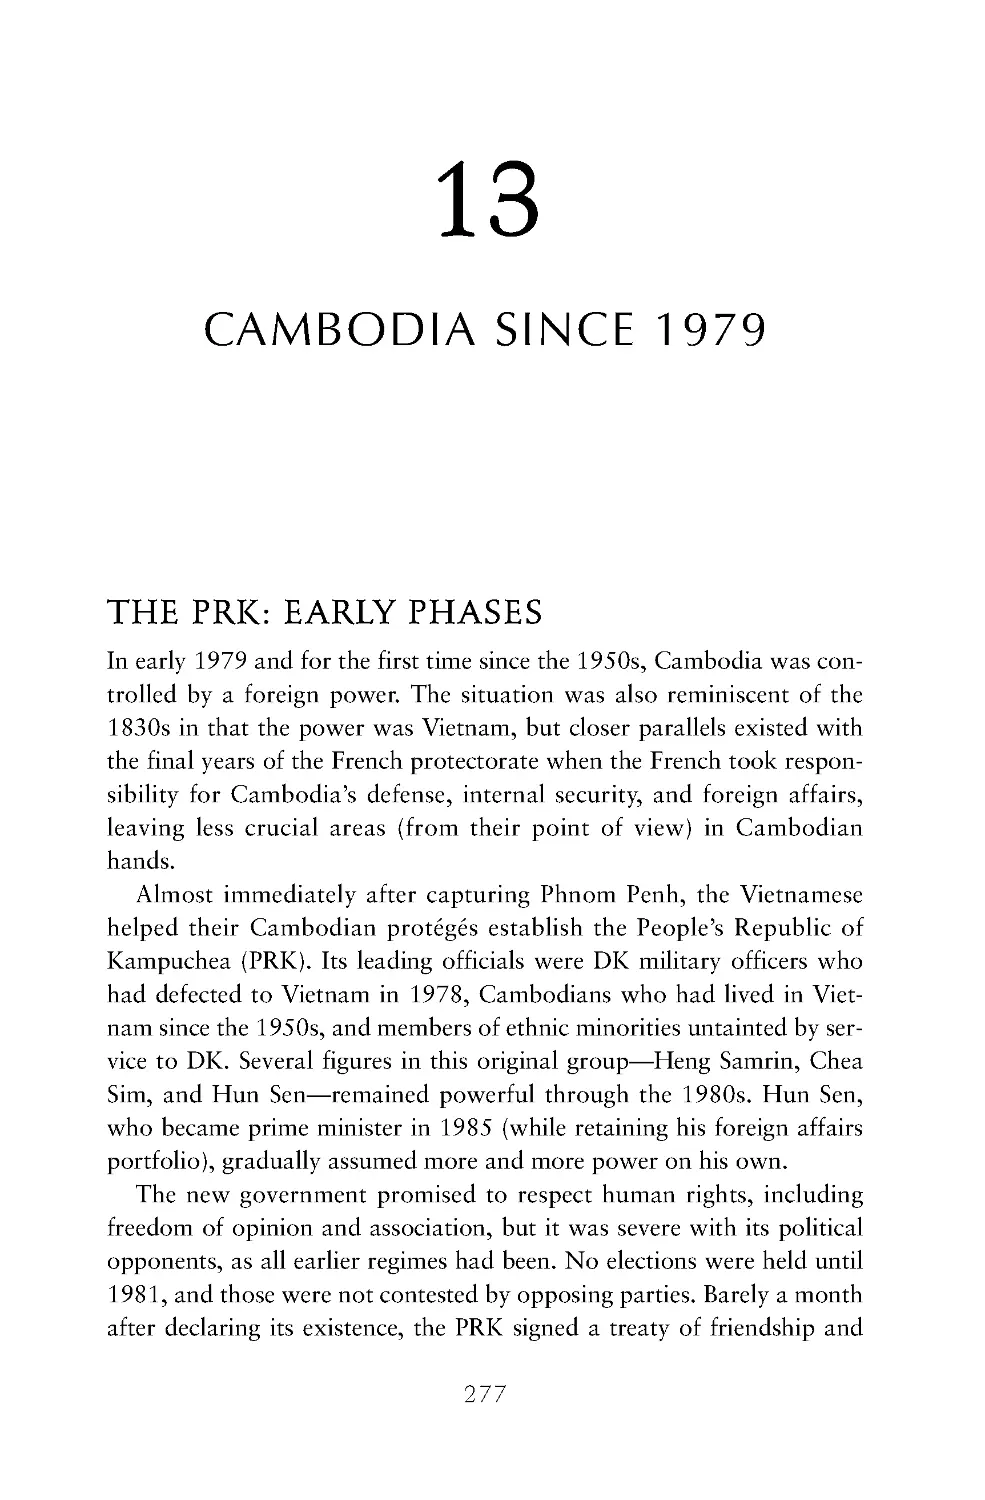 13. Cambodia Since 1979
The PRK: Early Phases